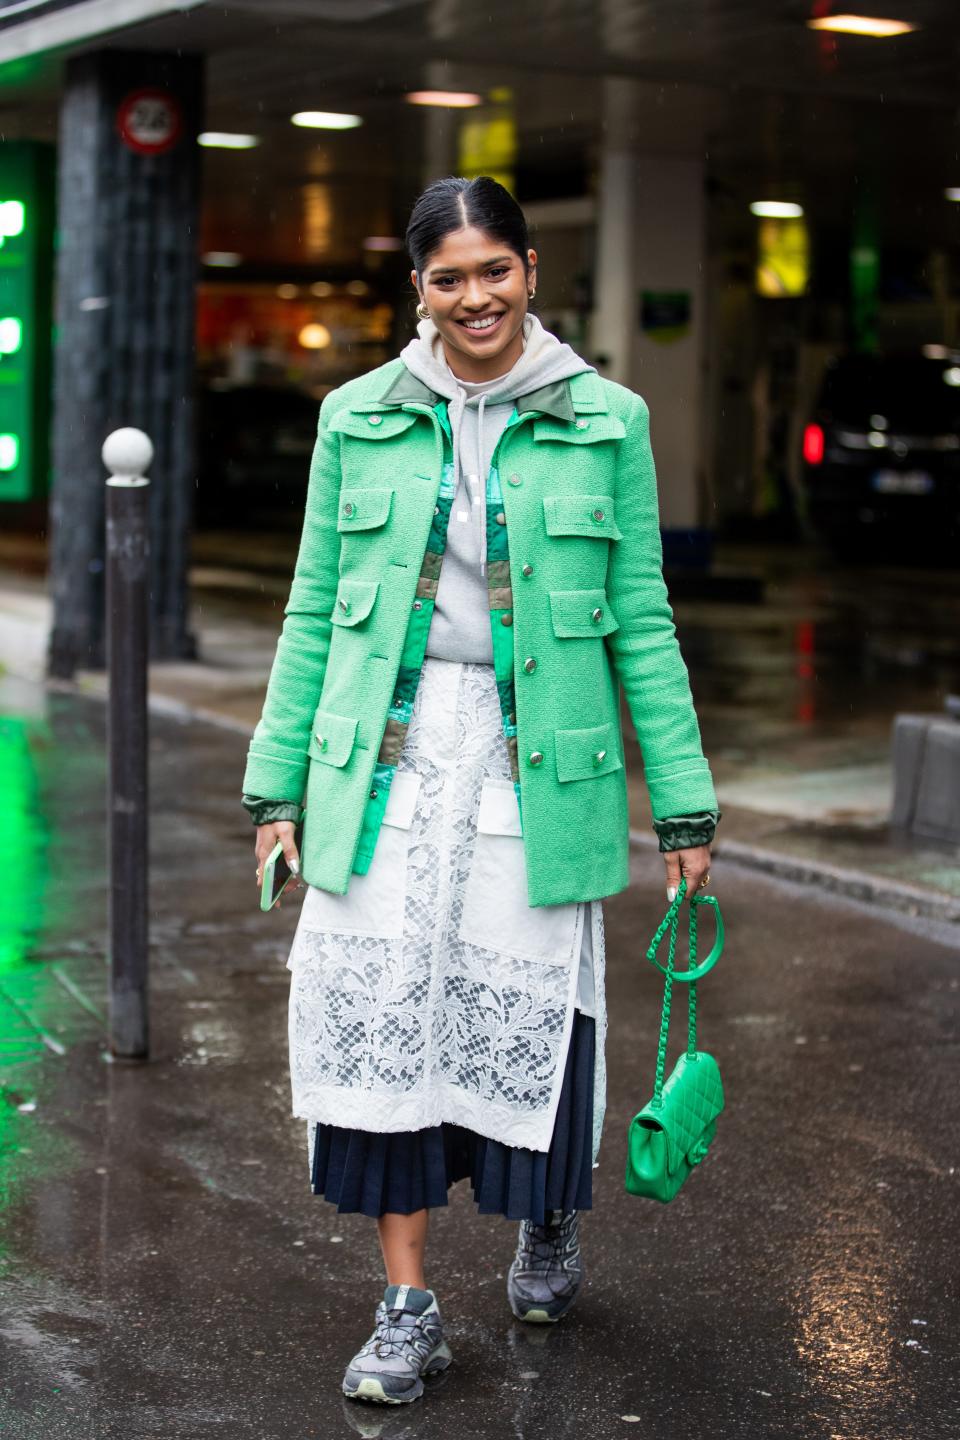 17 Non-Cheesy Green Outfit Ideas to Wear On St. Patrick's Day